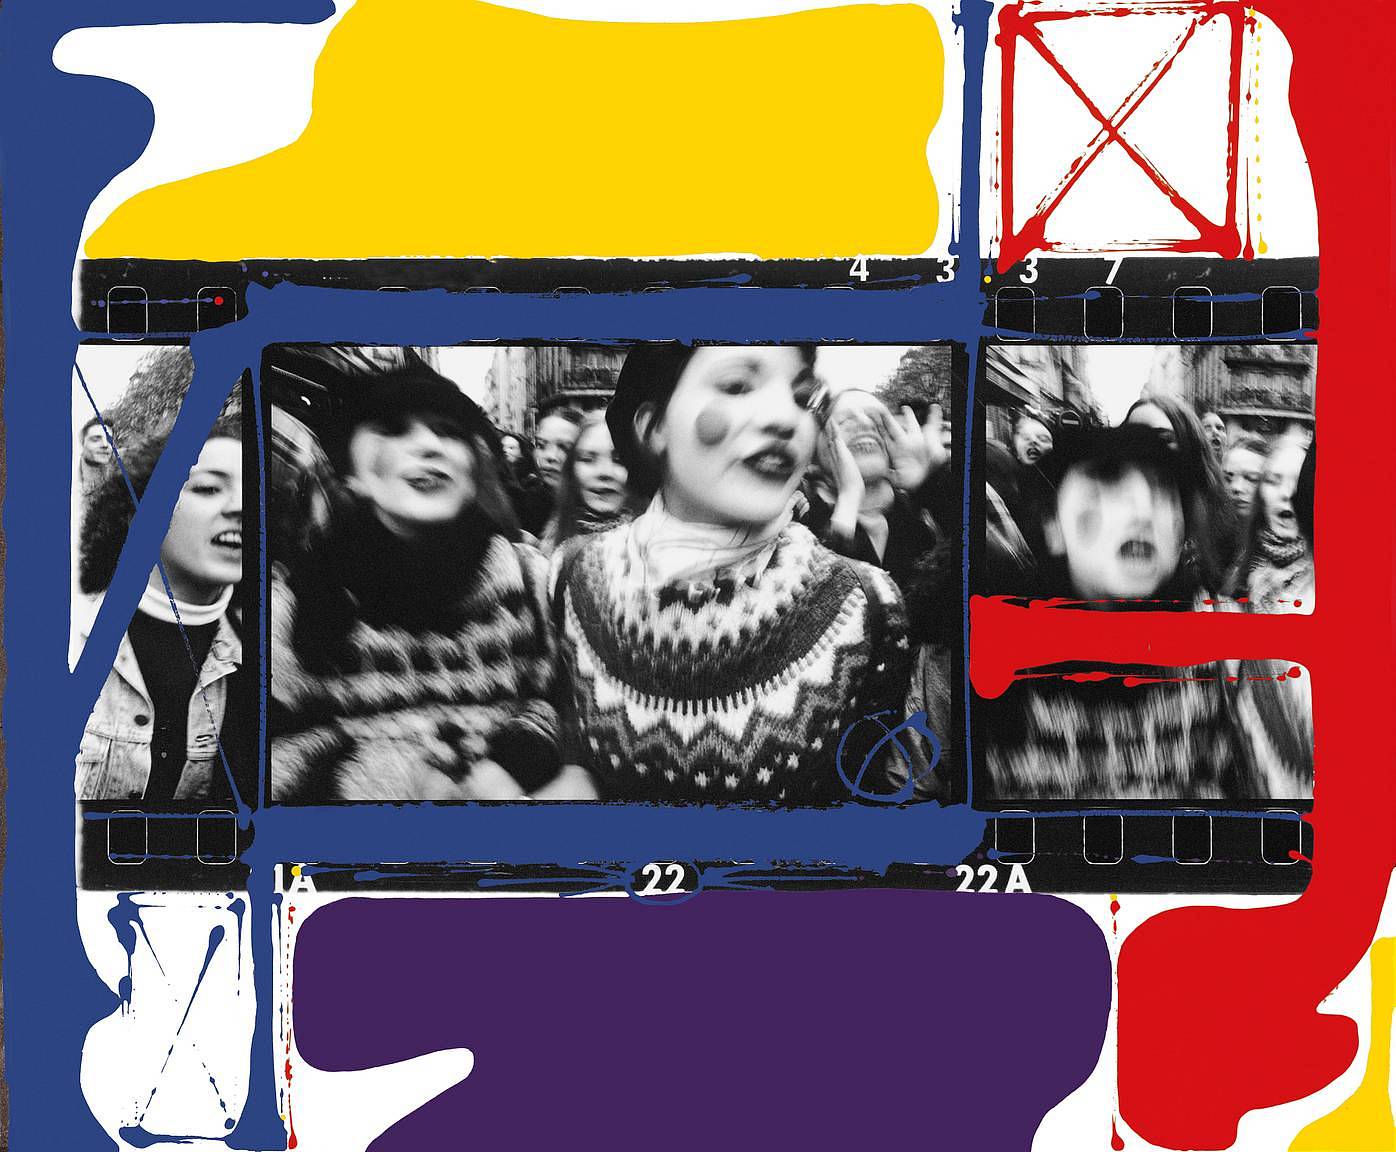 Lomography x William Klein x Polka Factory: Street Photography Competition